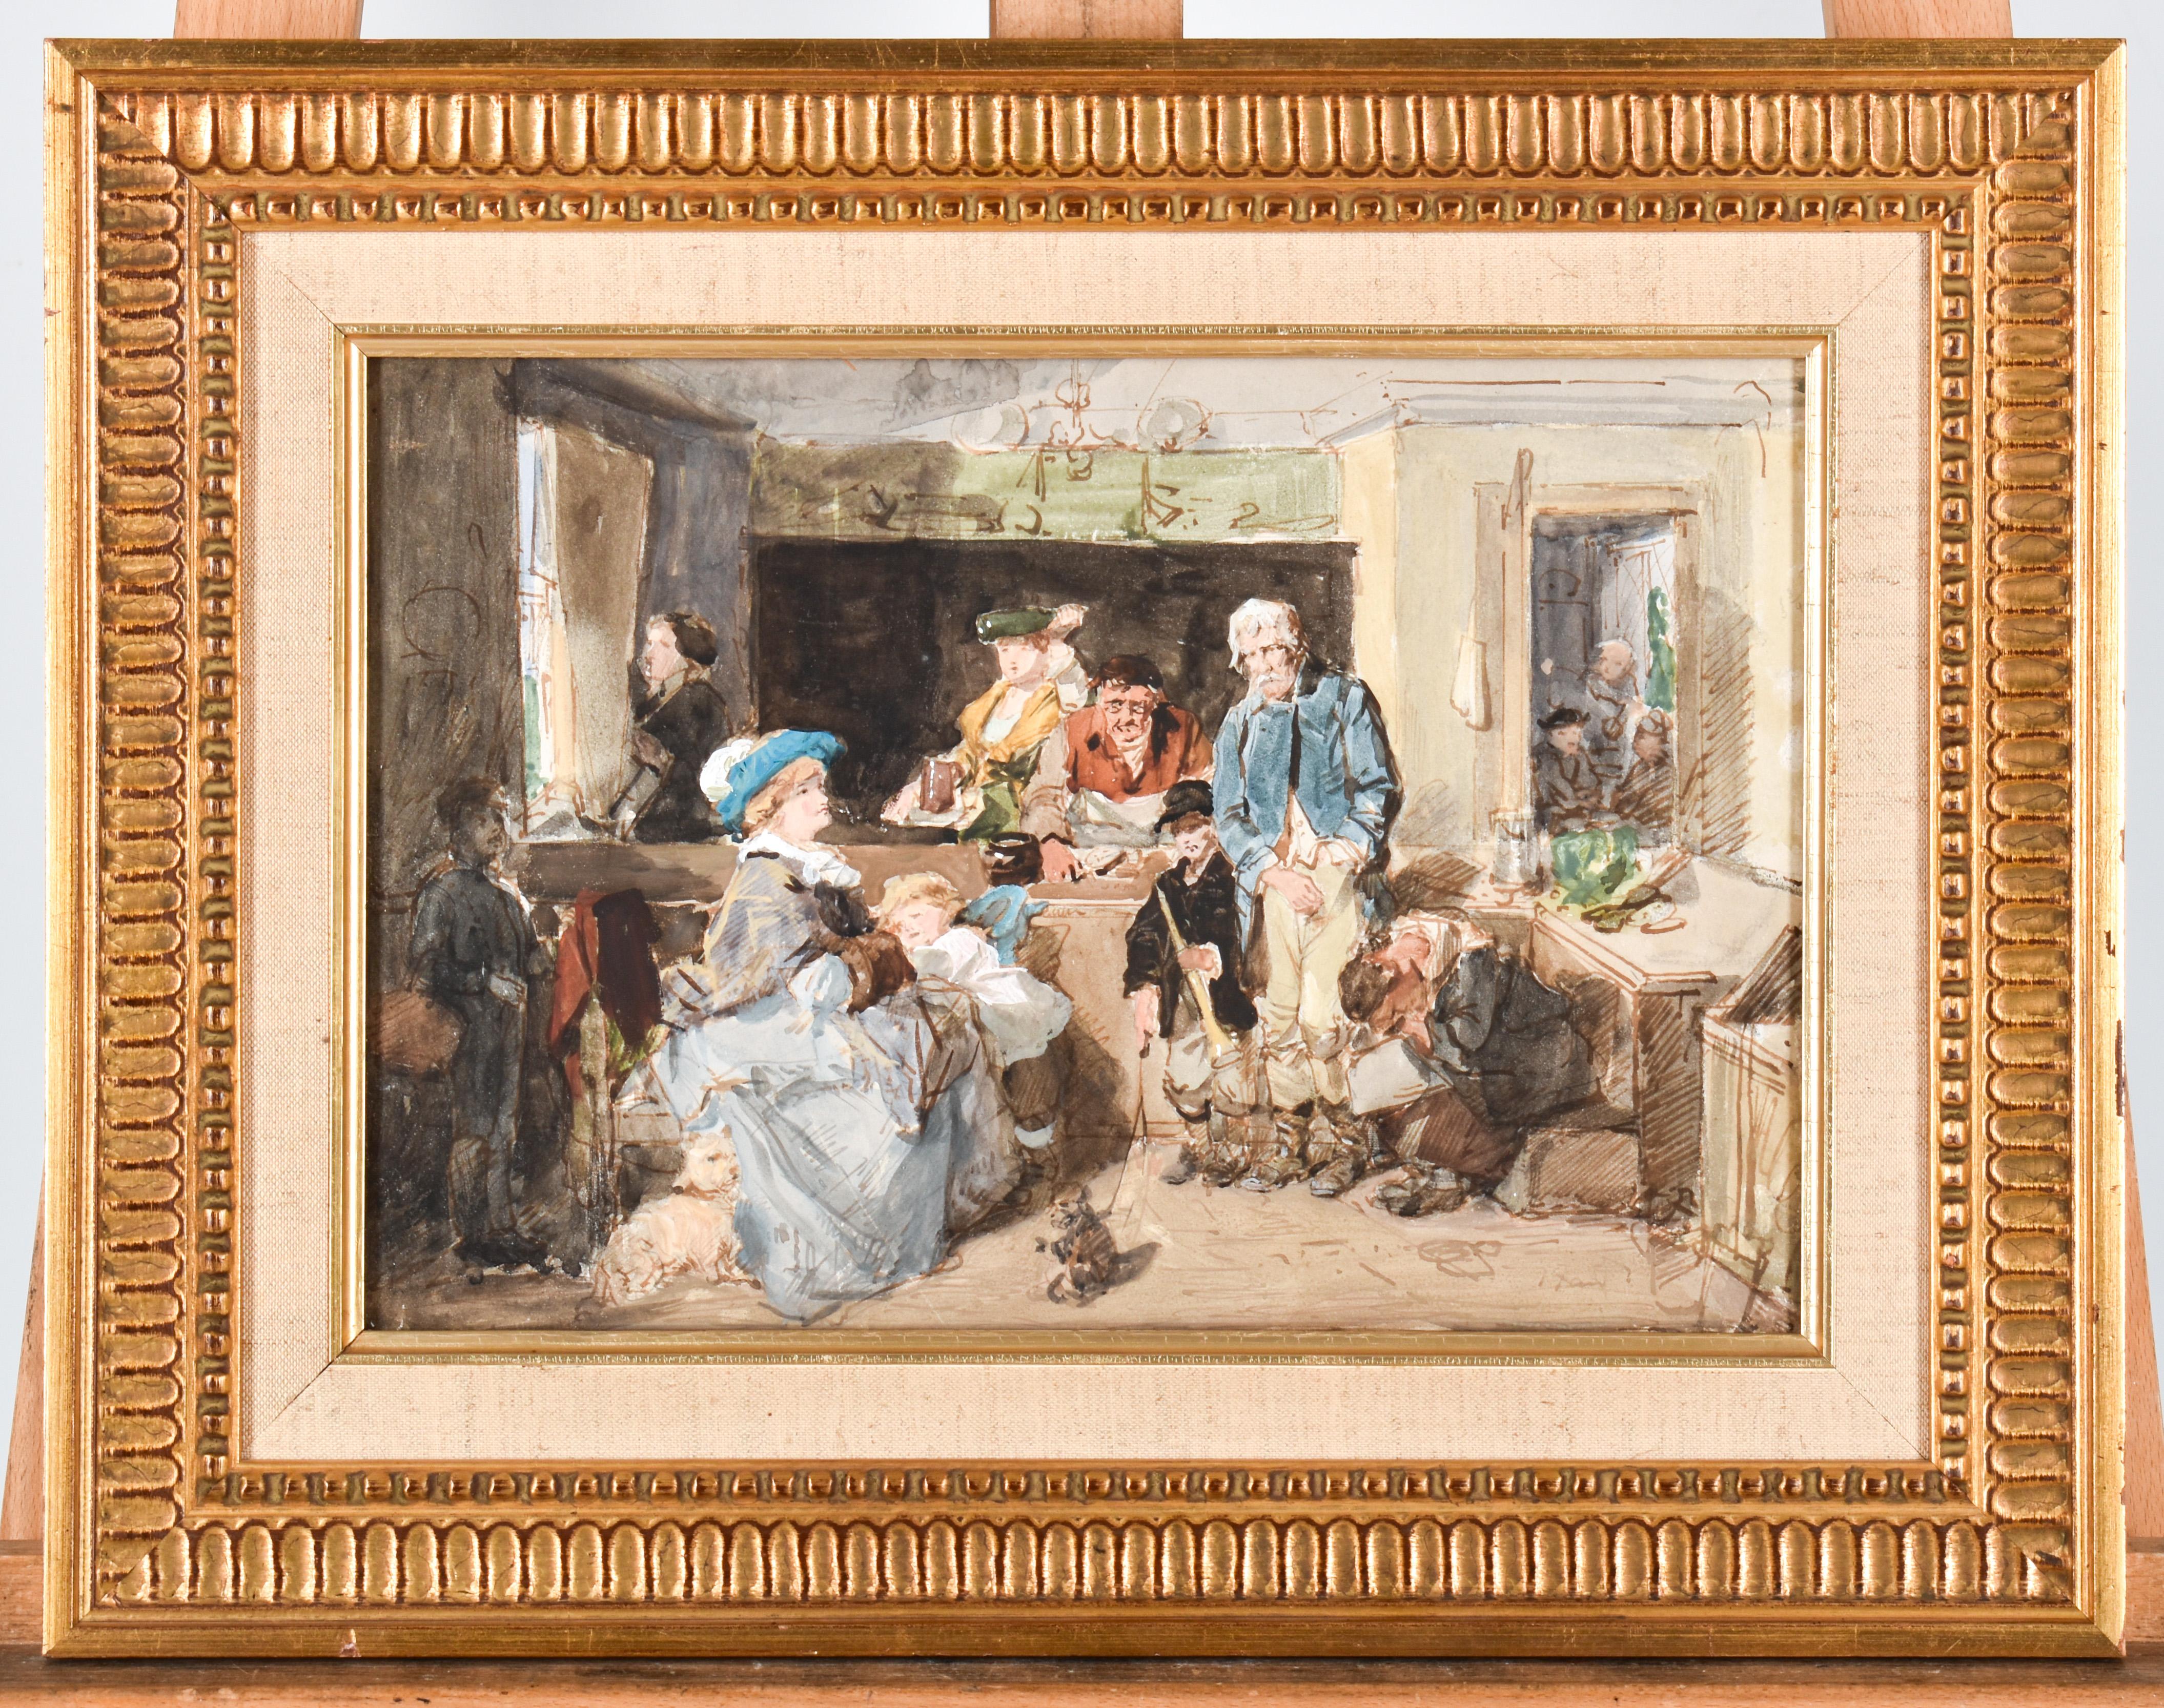 The Family - Thomas Fead - Watercolor - Scottisch - Academy - Romantic For Sale 1